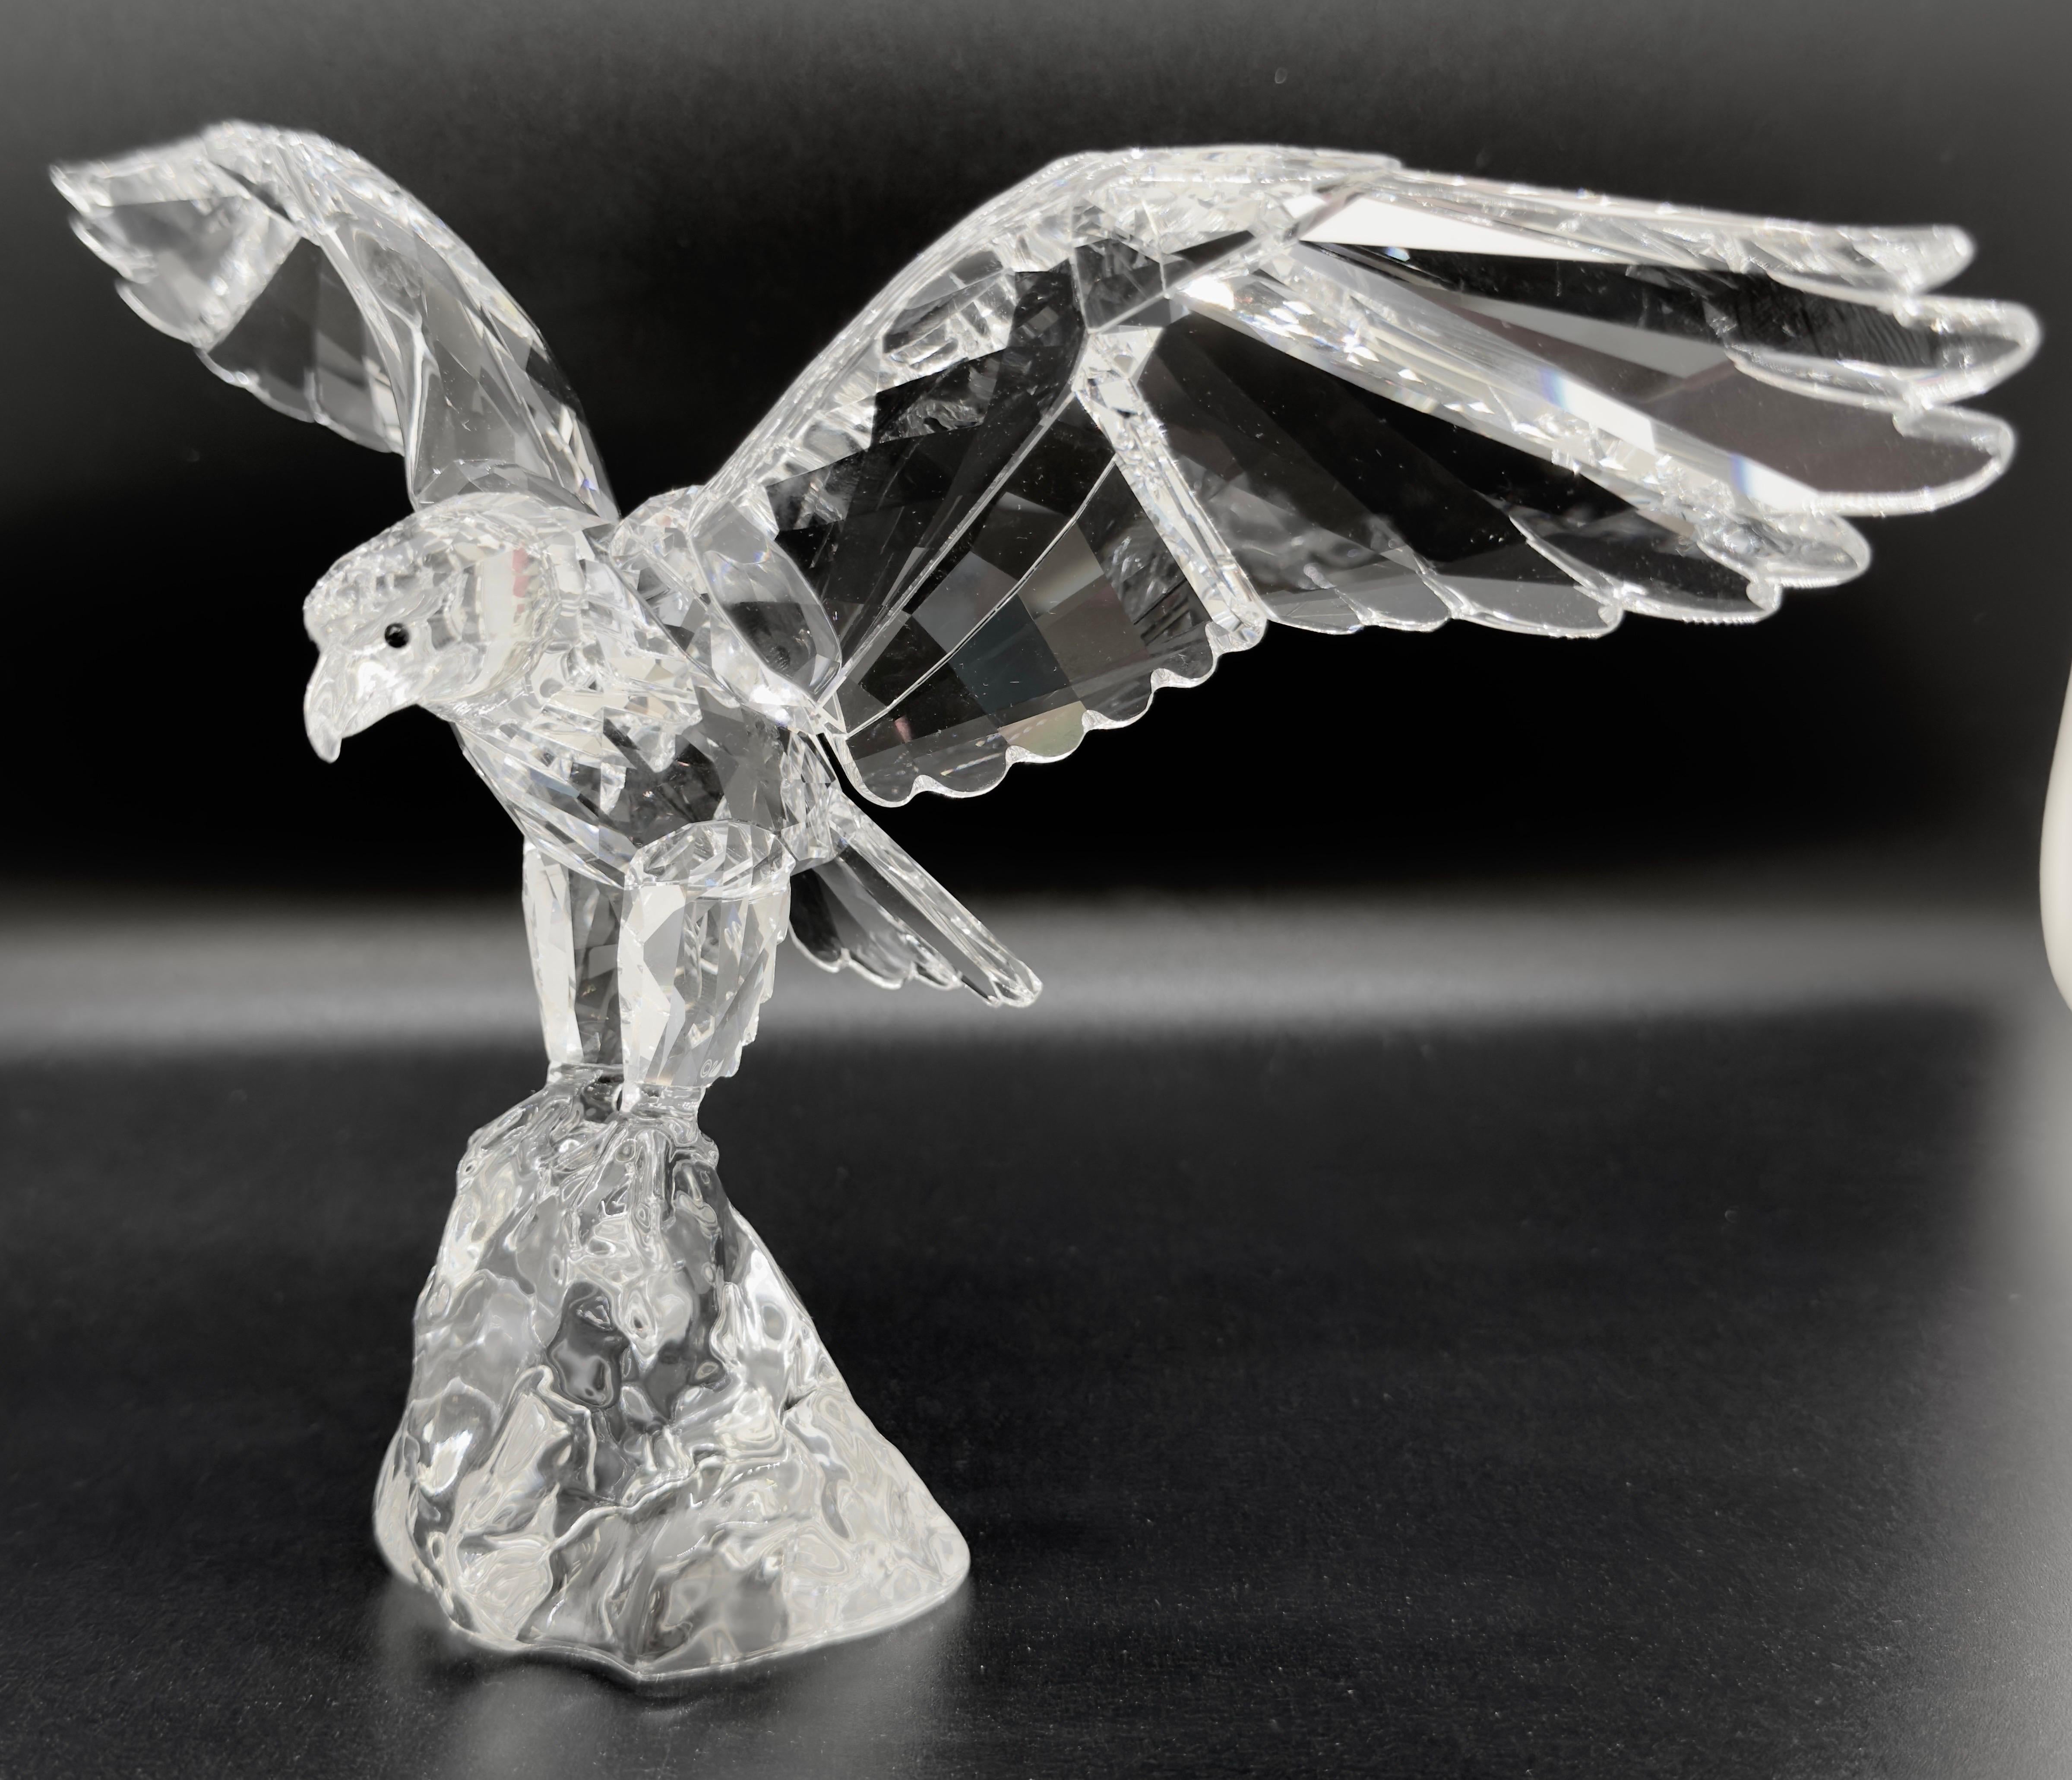 A Swarovski Eagle figurine made of high quality crystal and designed by Anton Hirzinger. Made in Australia, the figurine shows an eagle with its wings outspread and poised to take flight.  Symbol of strength and freedom, this rare Eagle sculpture is